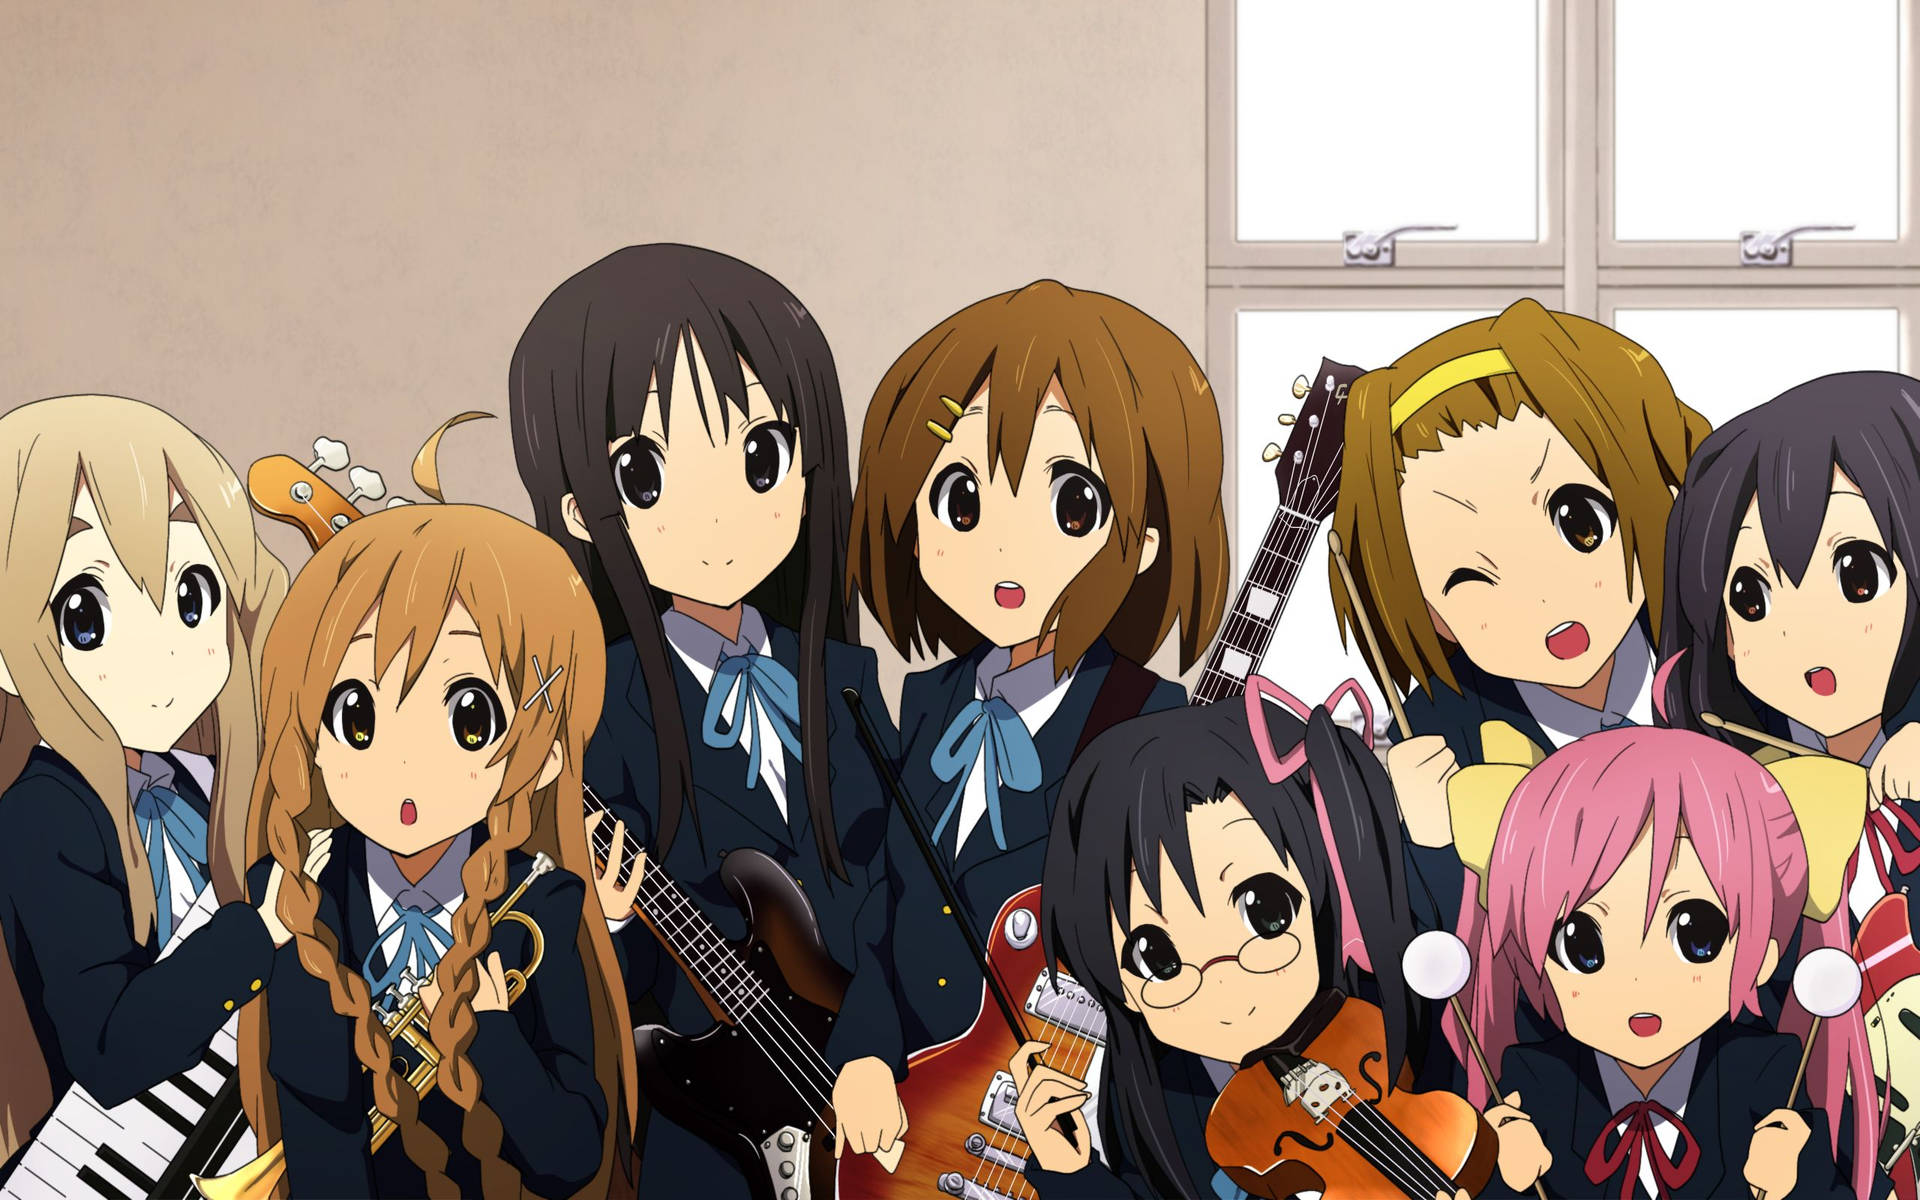 Free K-on Wallpaper Downloads, [100+] K-on Wallpapers for FREE | Wallpapers .com